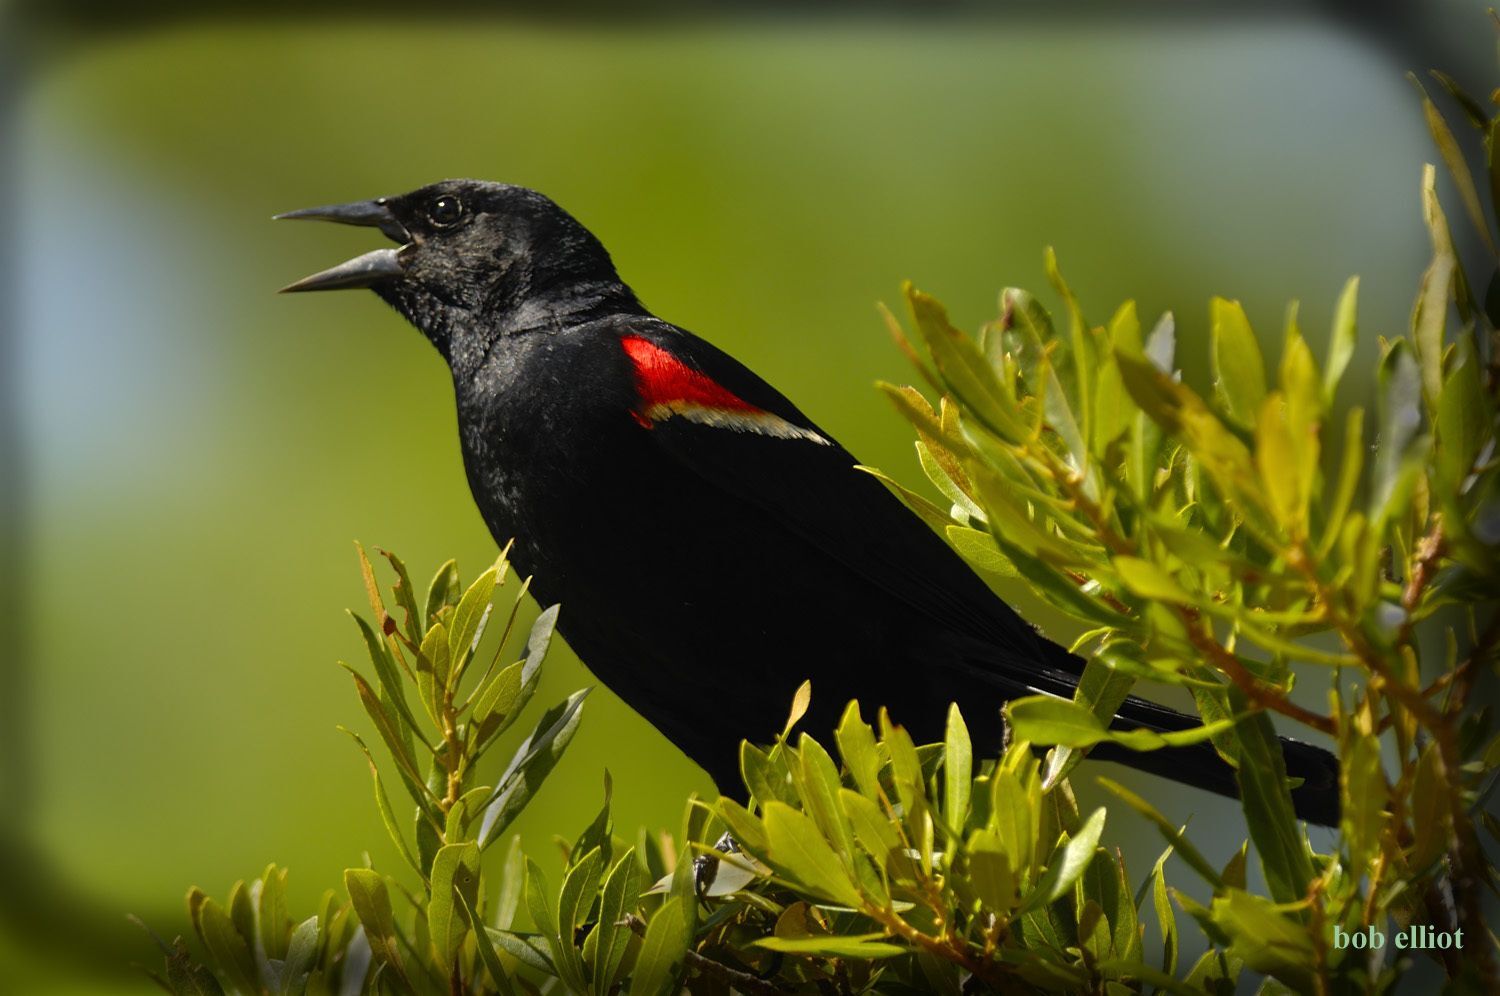 A male red-winged blackbird is perched on a wax myrtle branch with its mouth open. You can see the red feathers on its wing which gives this bird its name.